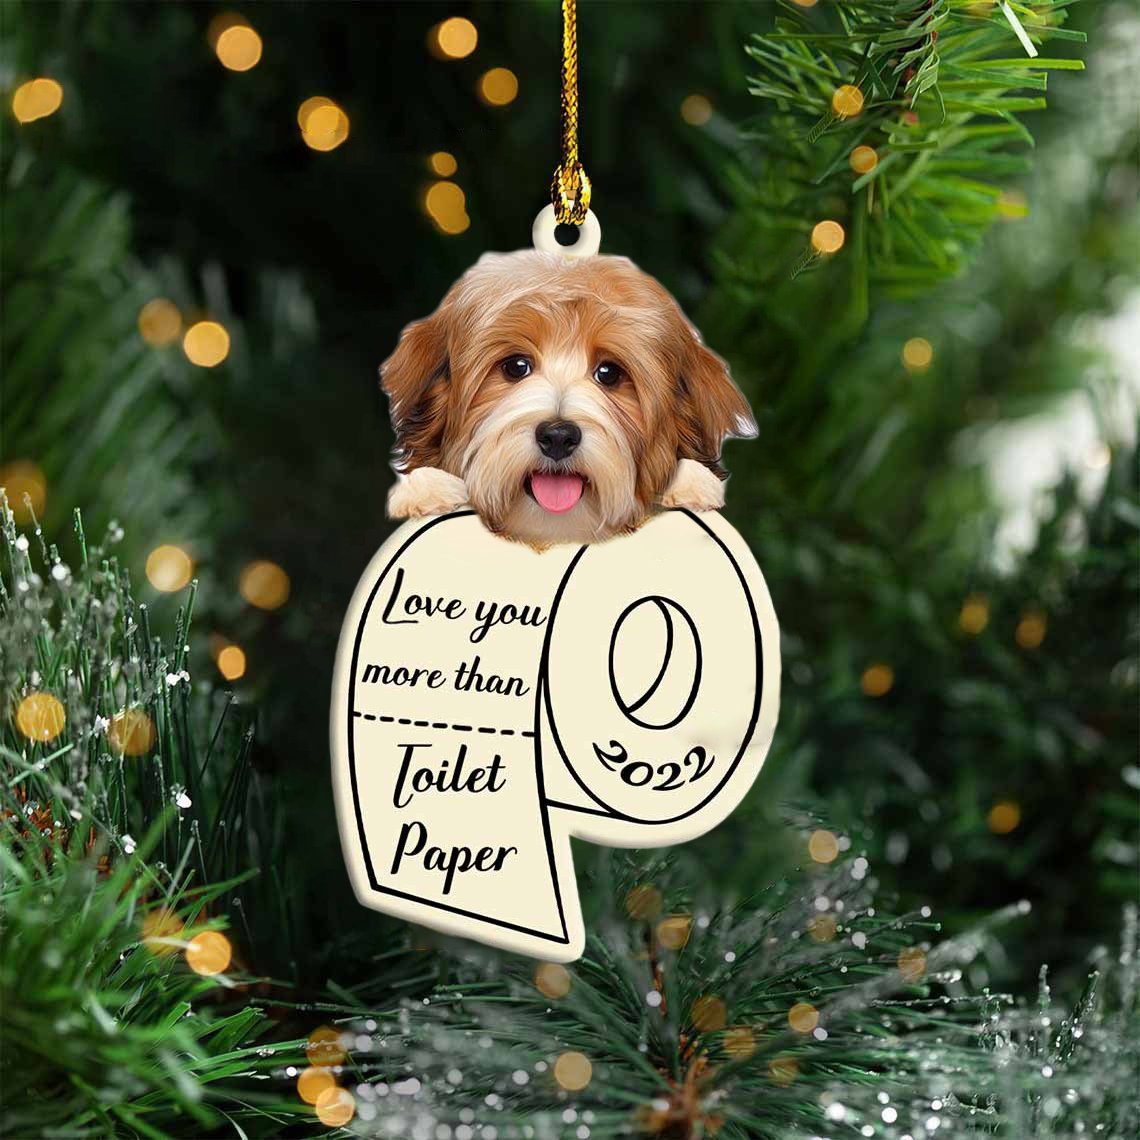 Havanese Love You More Than Toilet Paper 2022 Hanging Ornament